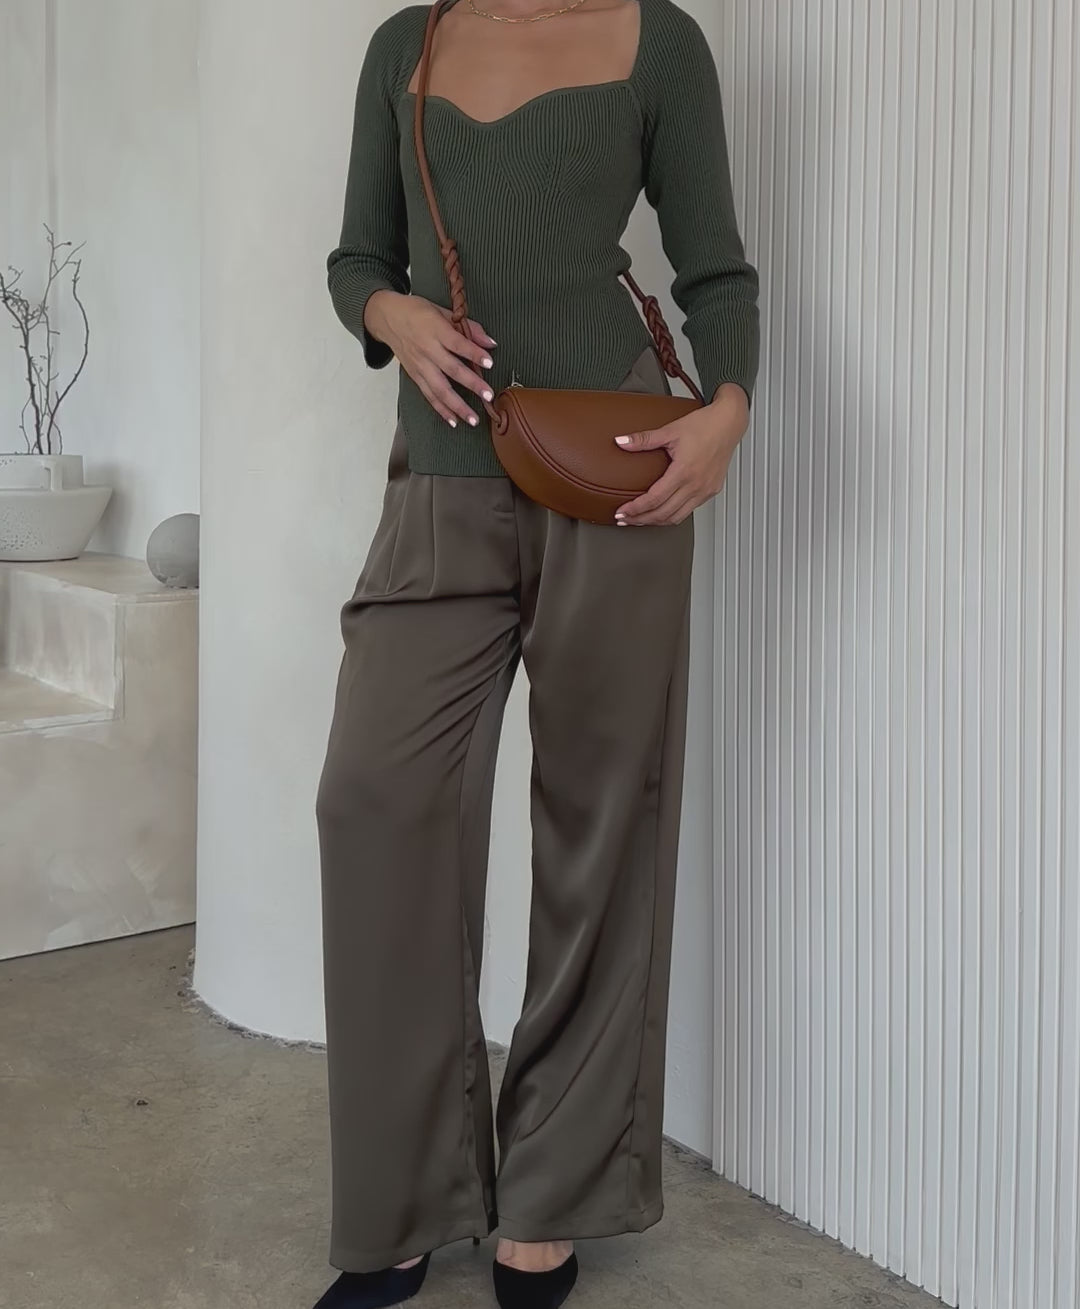 Video of a model wearing a small crescent shaped vegan leather crossbody bag against a white wall 